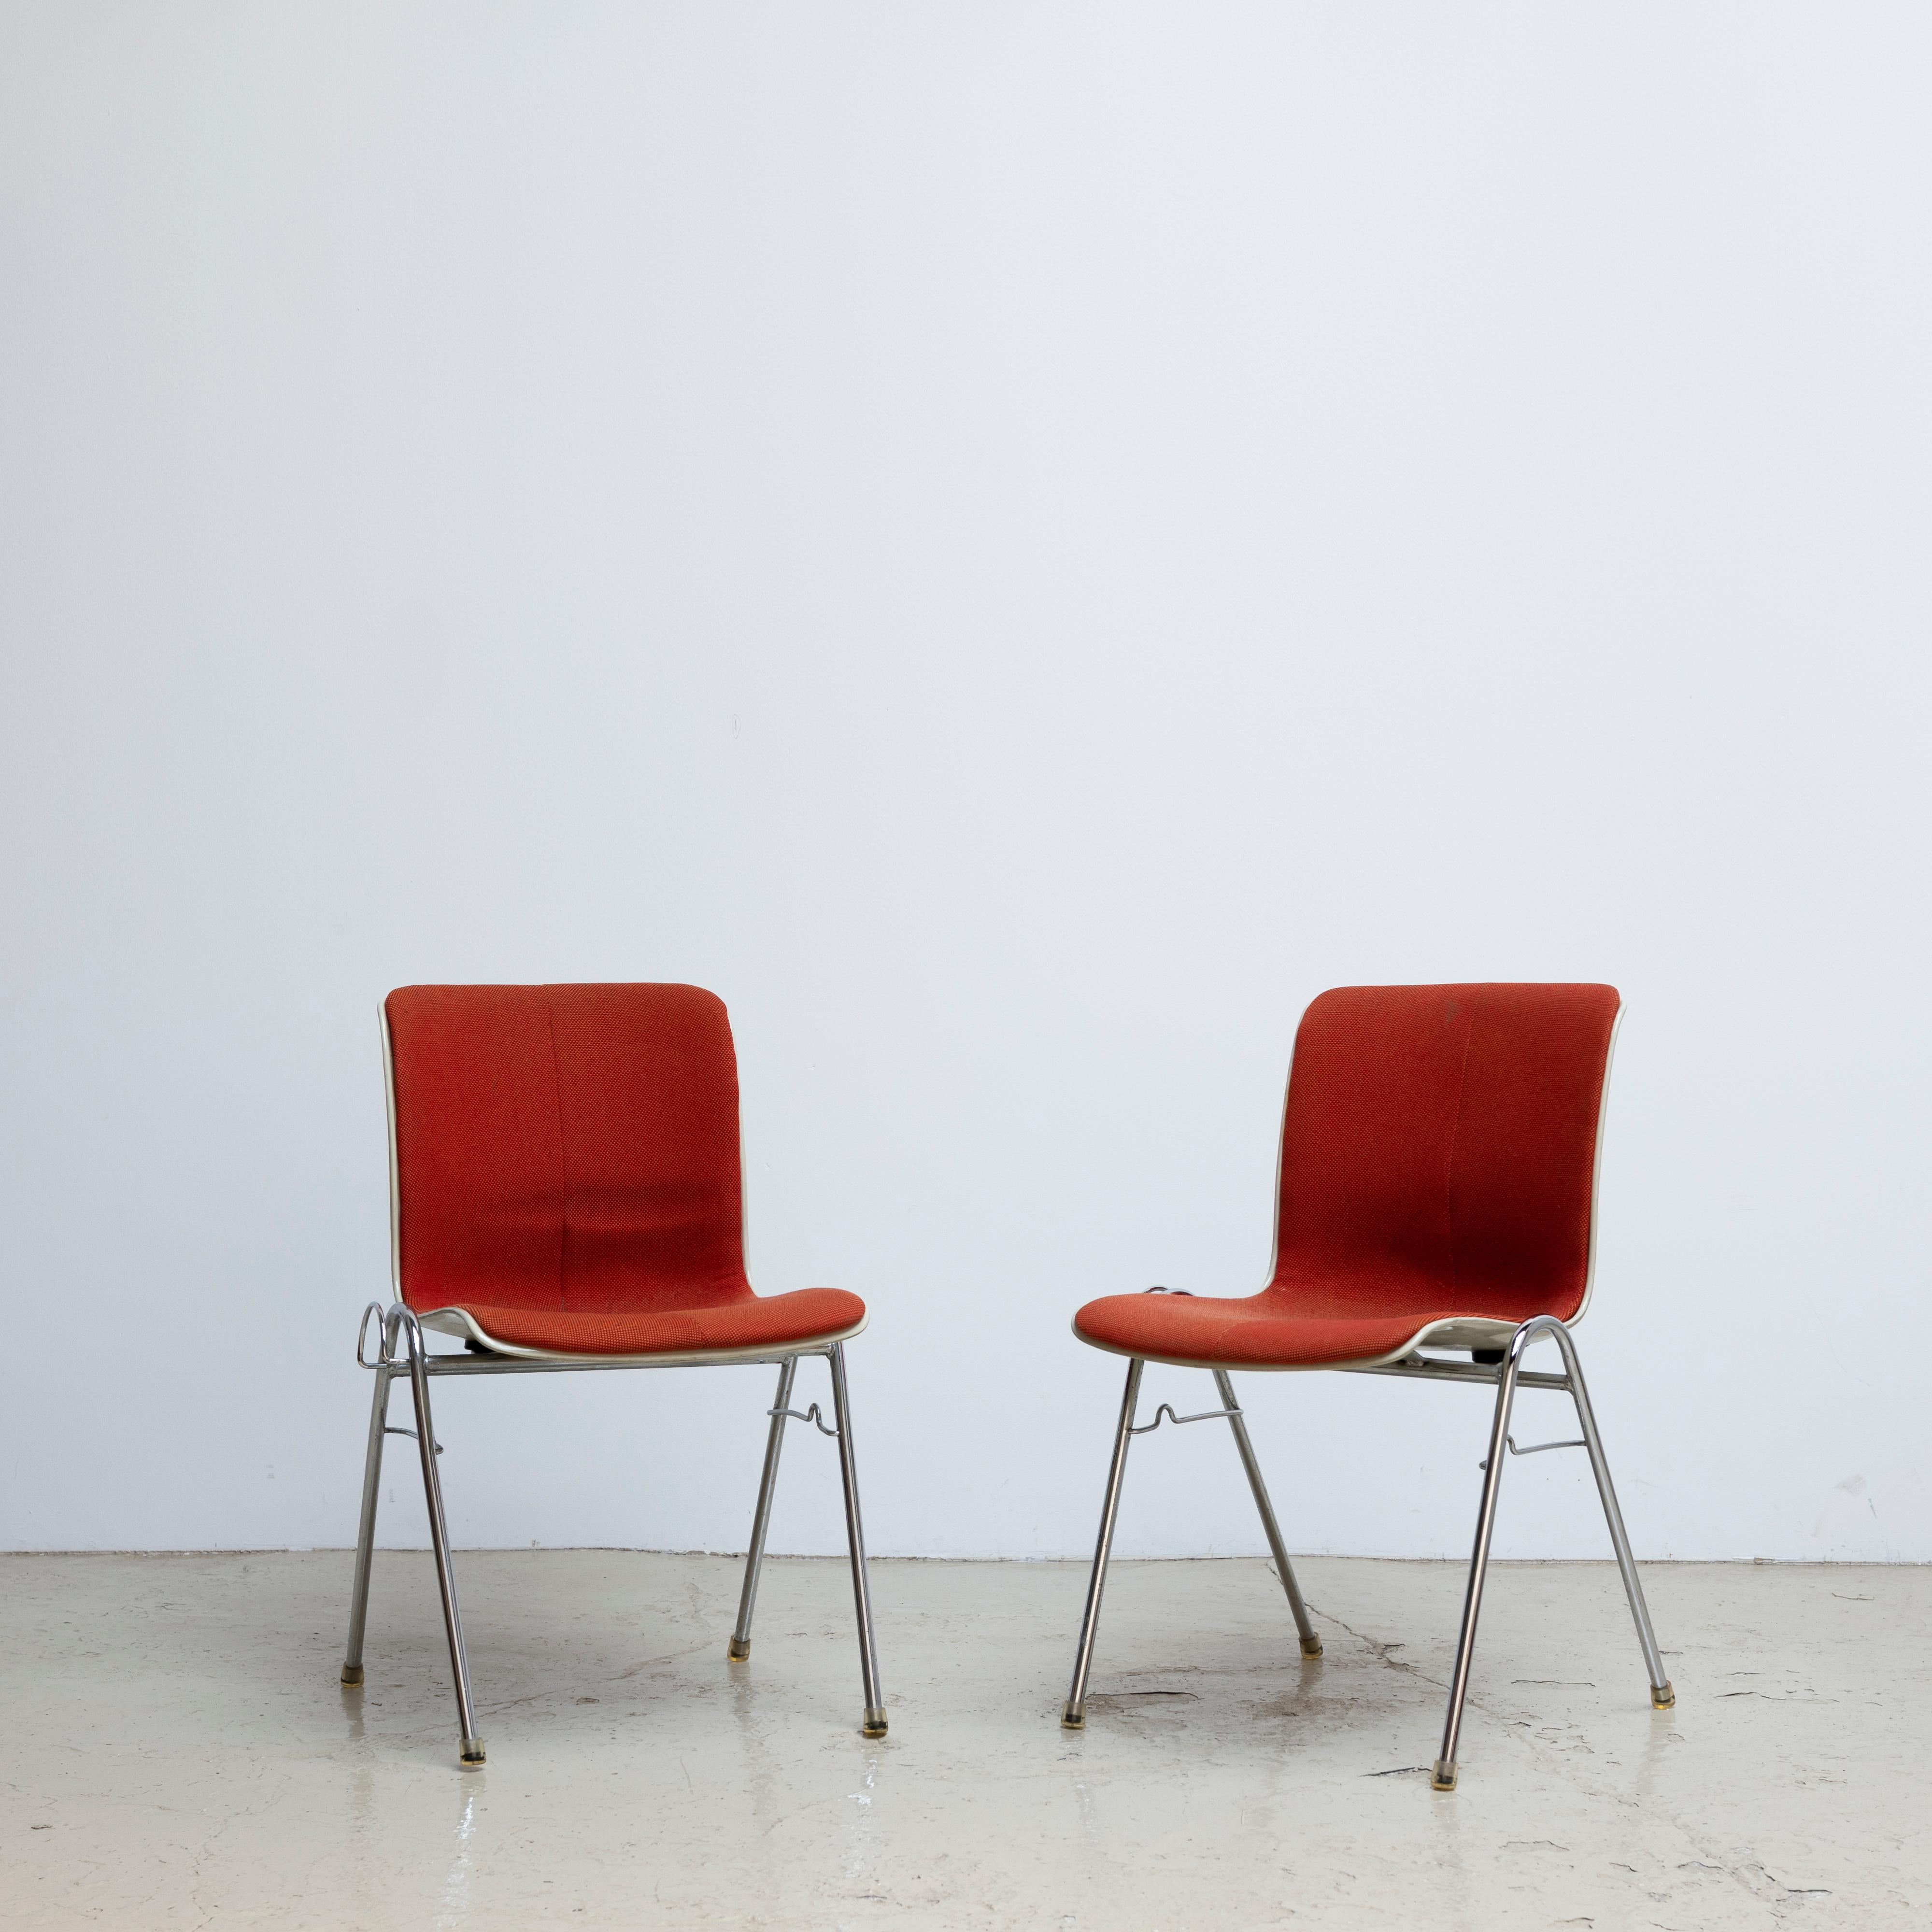 Stackable side chairs designed by Sori Yanagi in 1969 and manufactured by Kotobuki. Sold as a pair. Priced in pair.
Upholstery, FRP (fiber-glass reinforced plastic), steel.